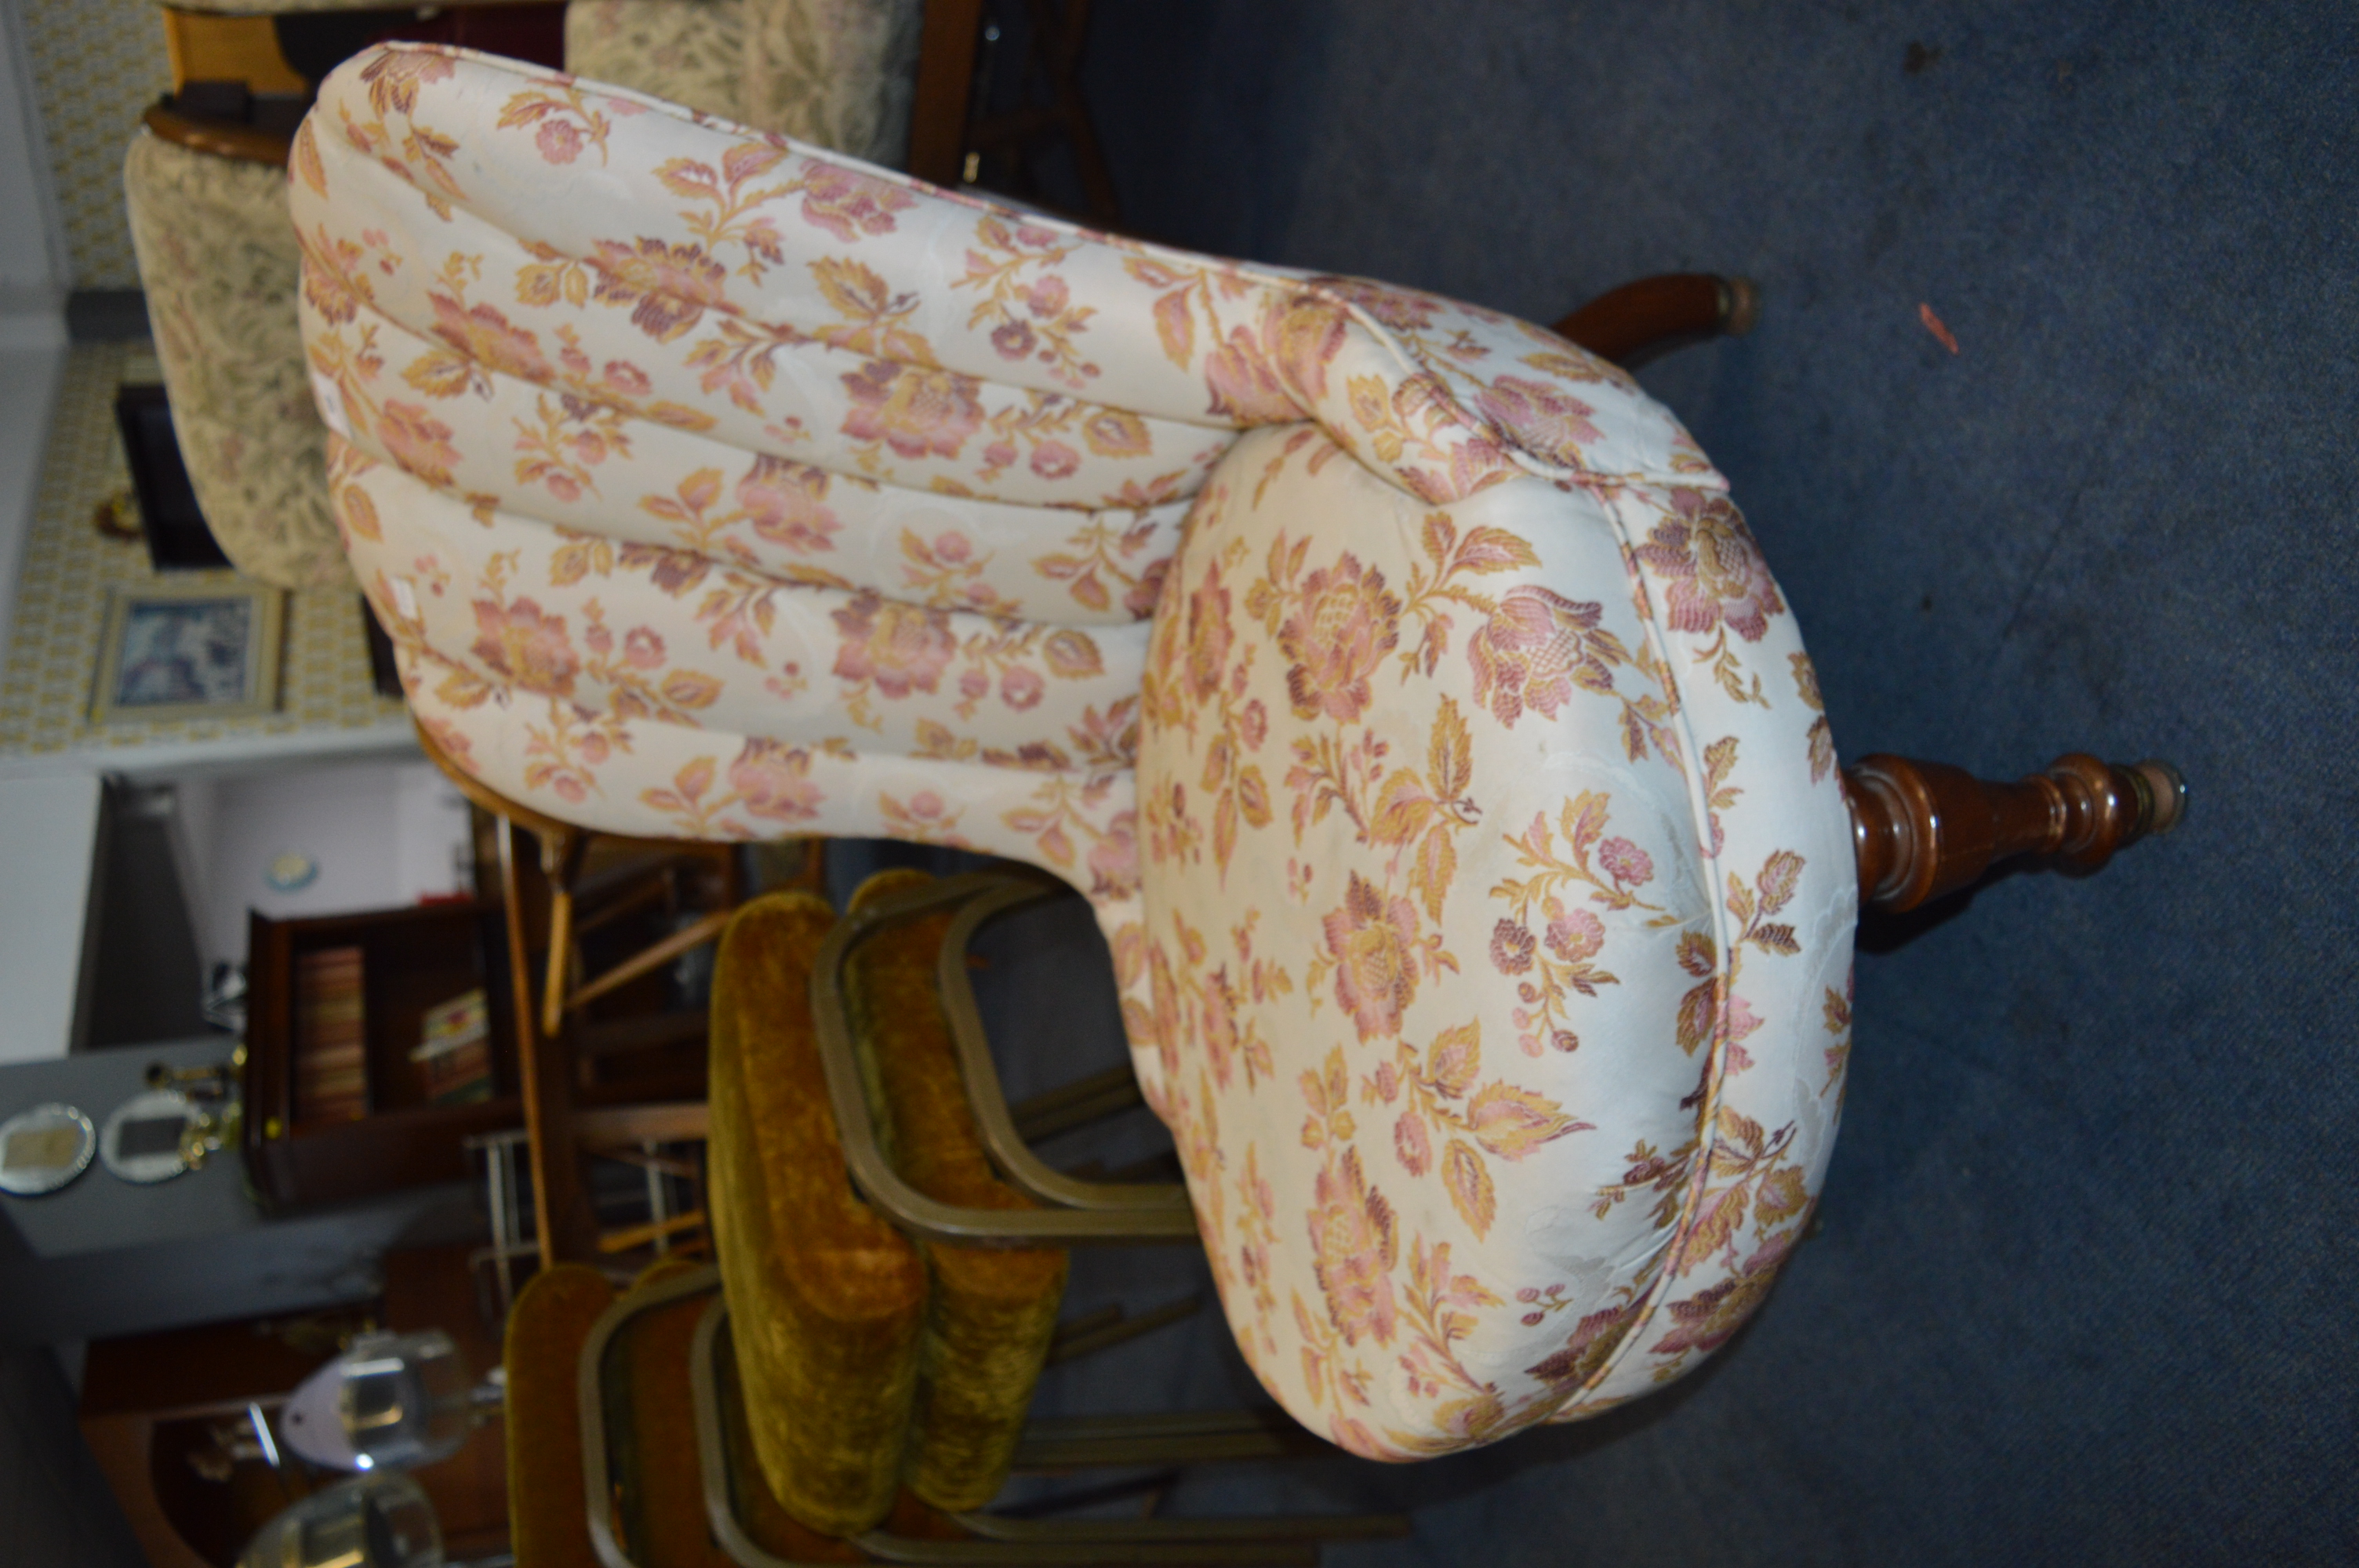 Victorian Nursing Chair with Floral Upholstery - Image 4 of 4